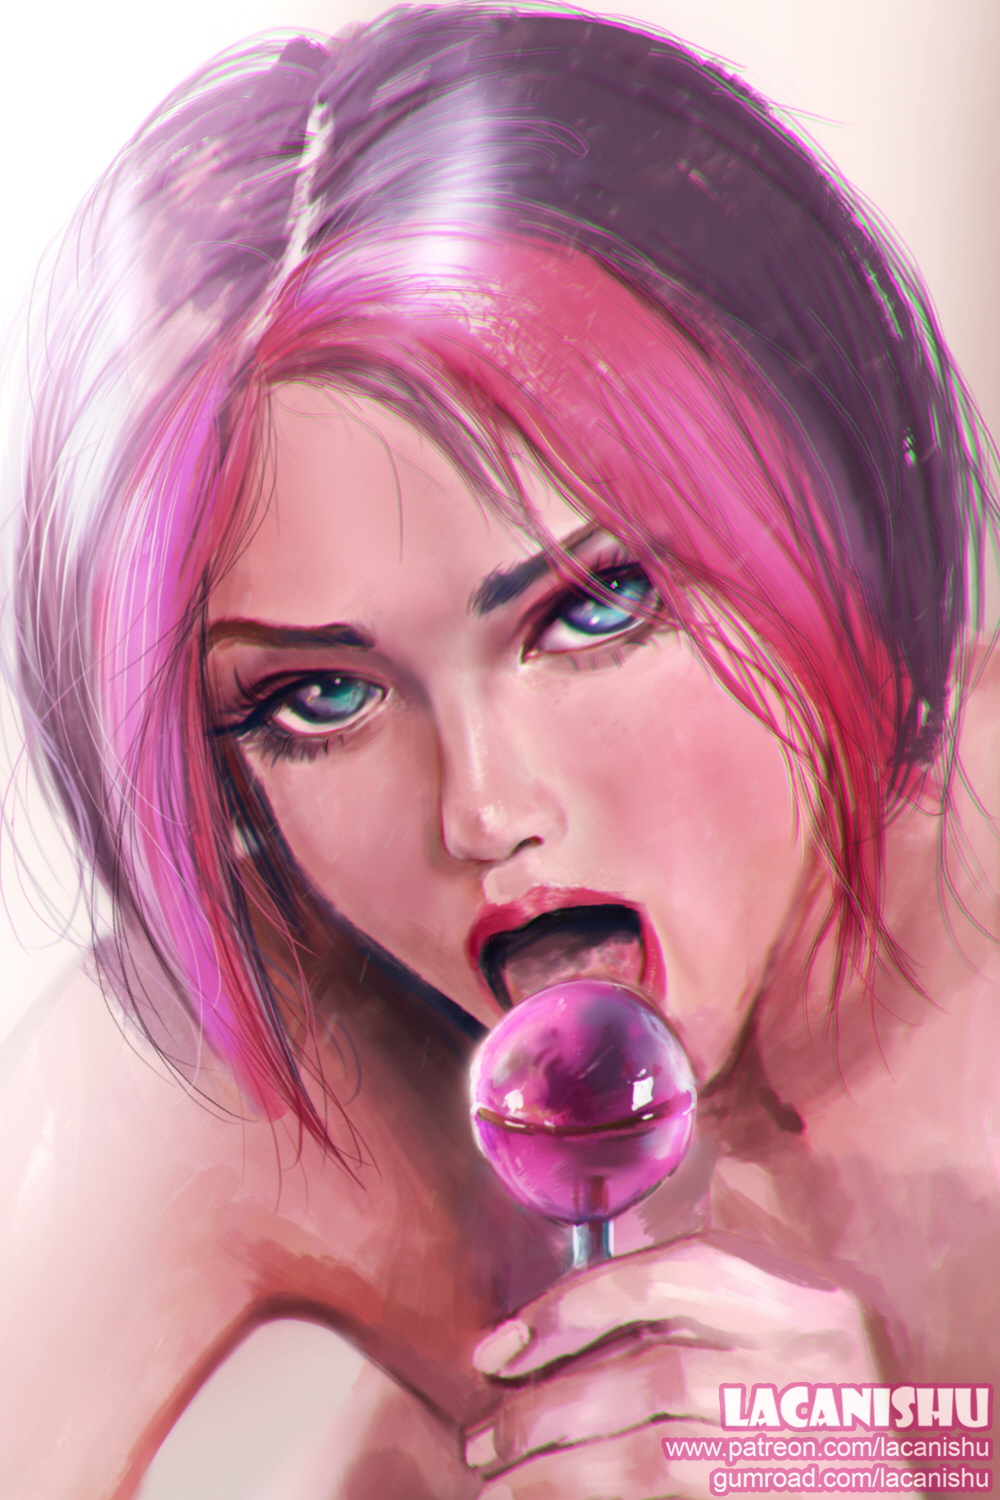 Hot collection of amazing art by Lacanishu Porn Comic